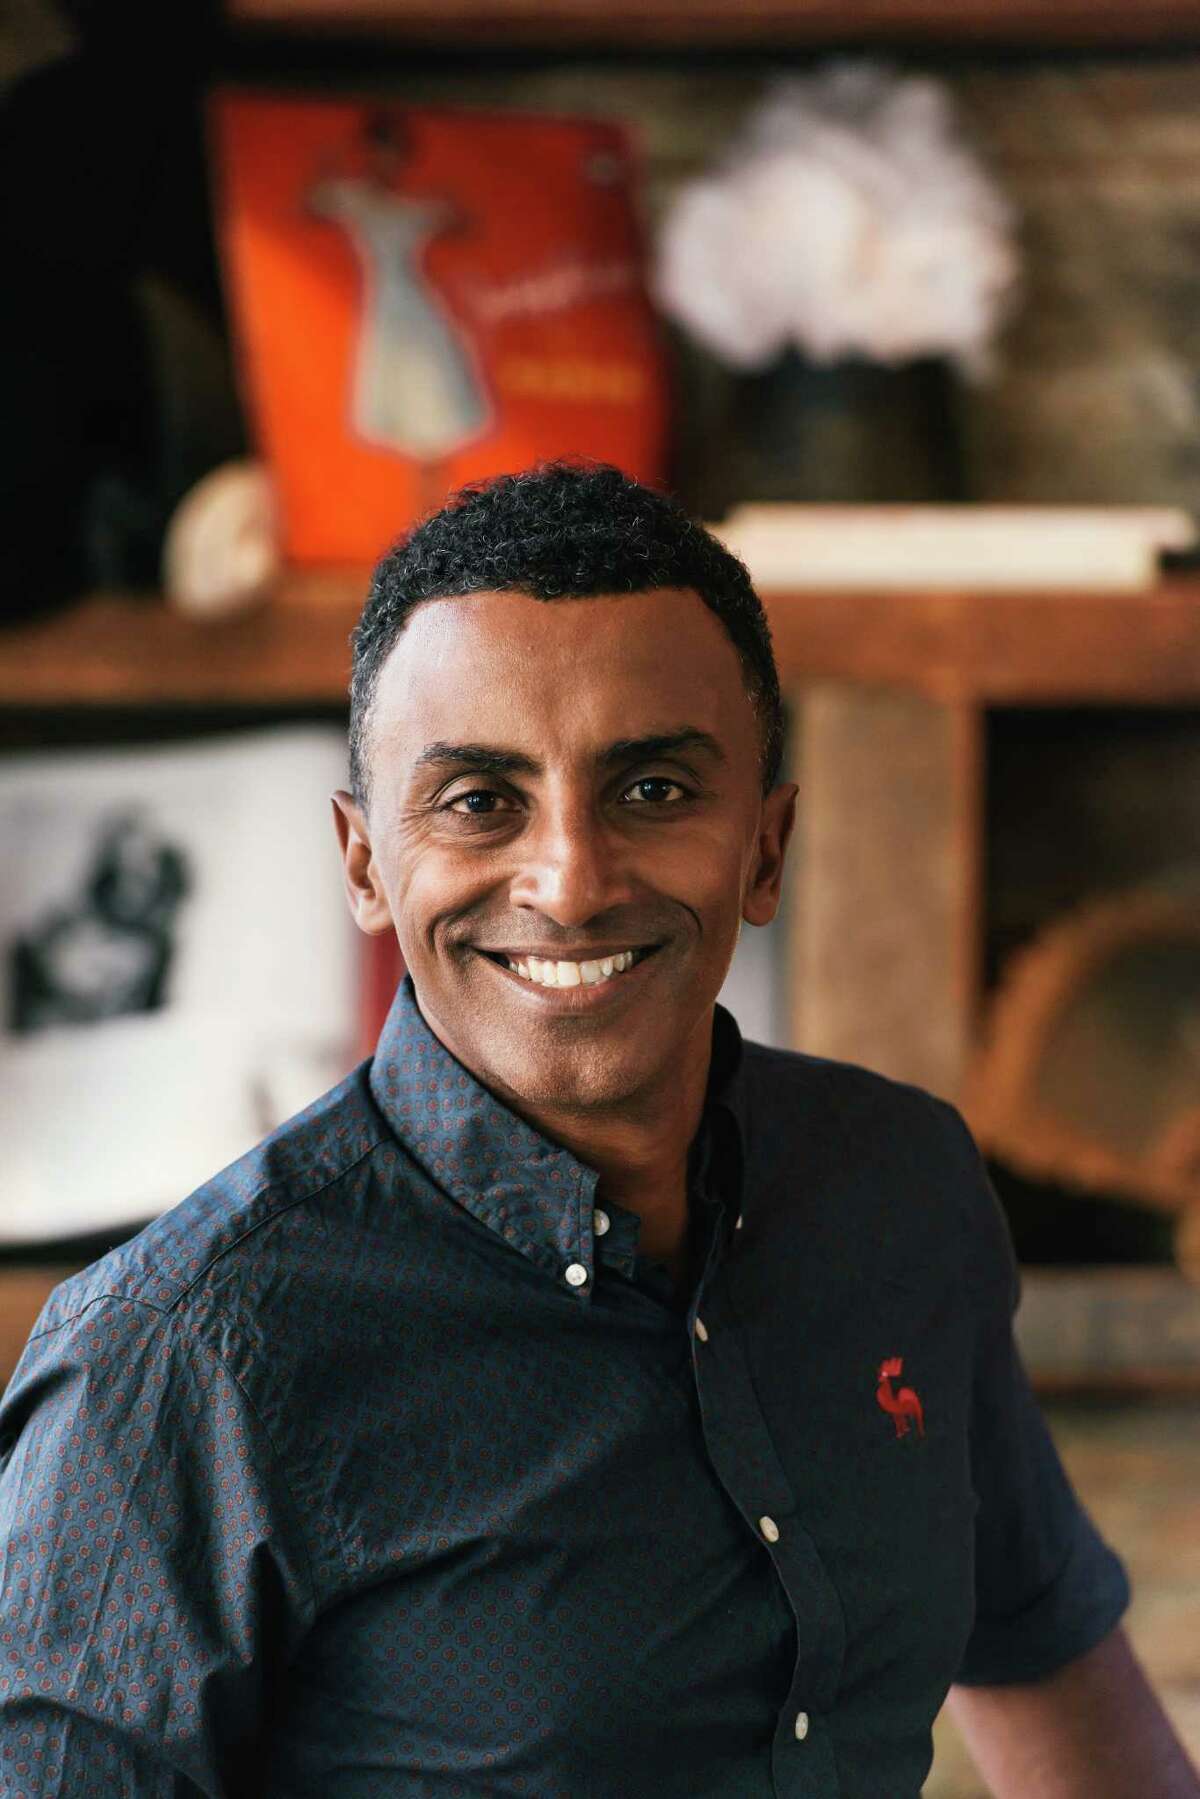 Marcus Samuelsson spoke about the culinary traditions that shape his recipes during a brunch at The Pass & Provisions.